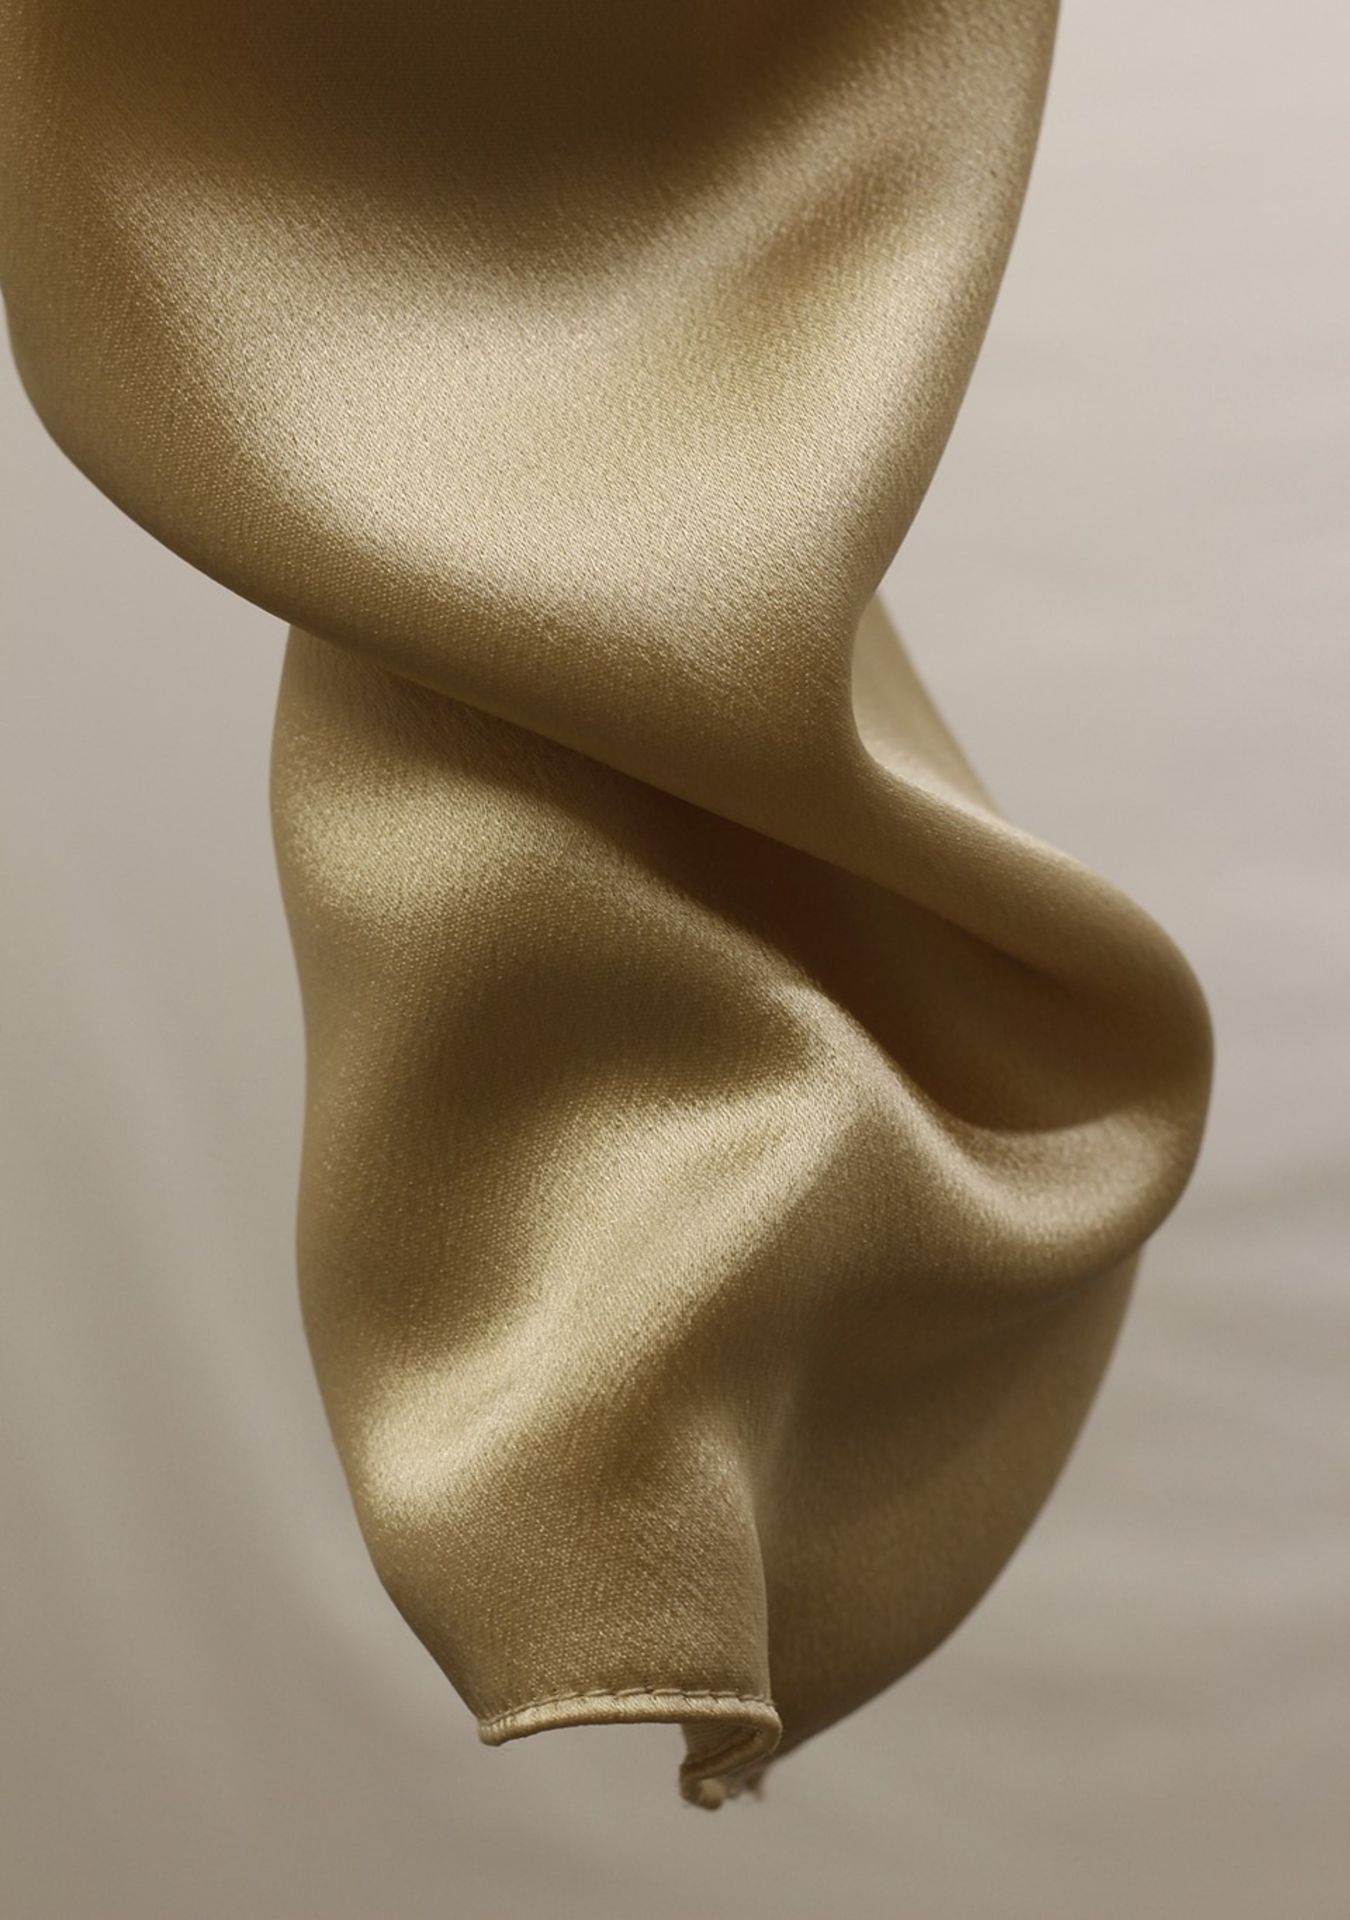 1 x Anne Belin Champagne Bolero - Size: 16 - Material: 50% Viscose, 50% Acetate - From a High End - Image 4 of 6